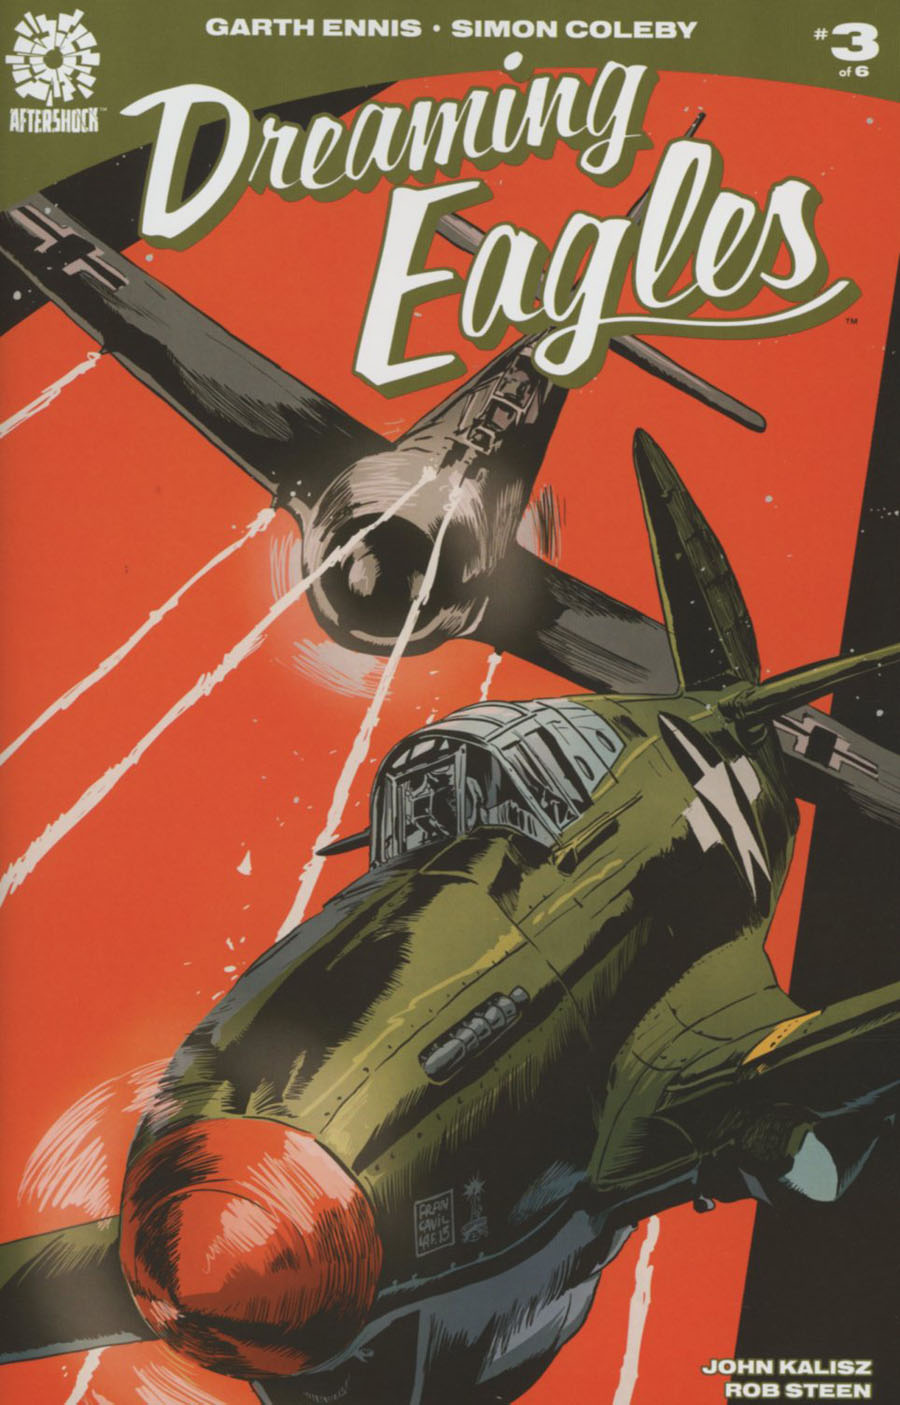 Dreaming Eagles #3